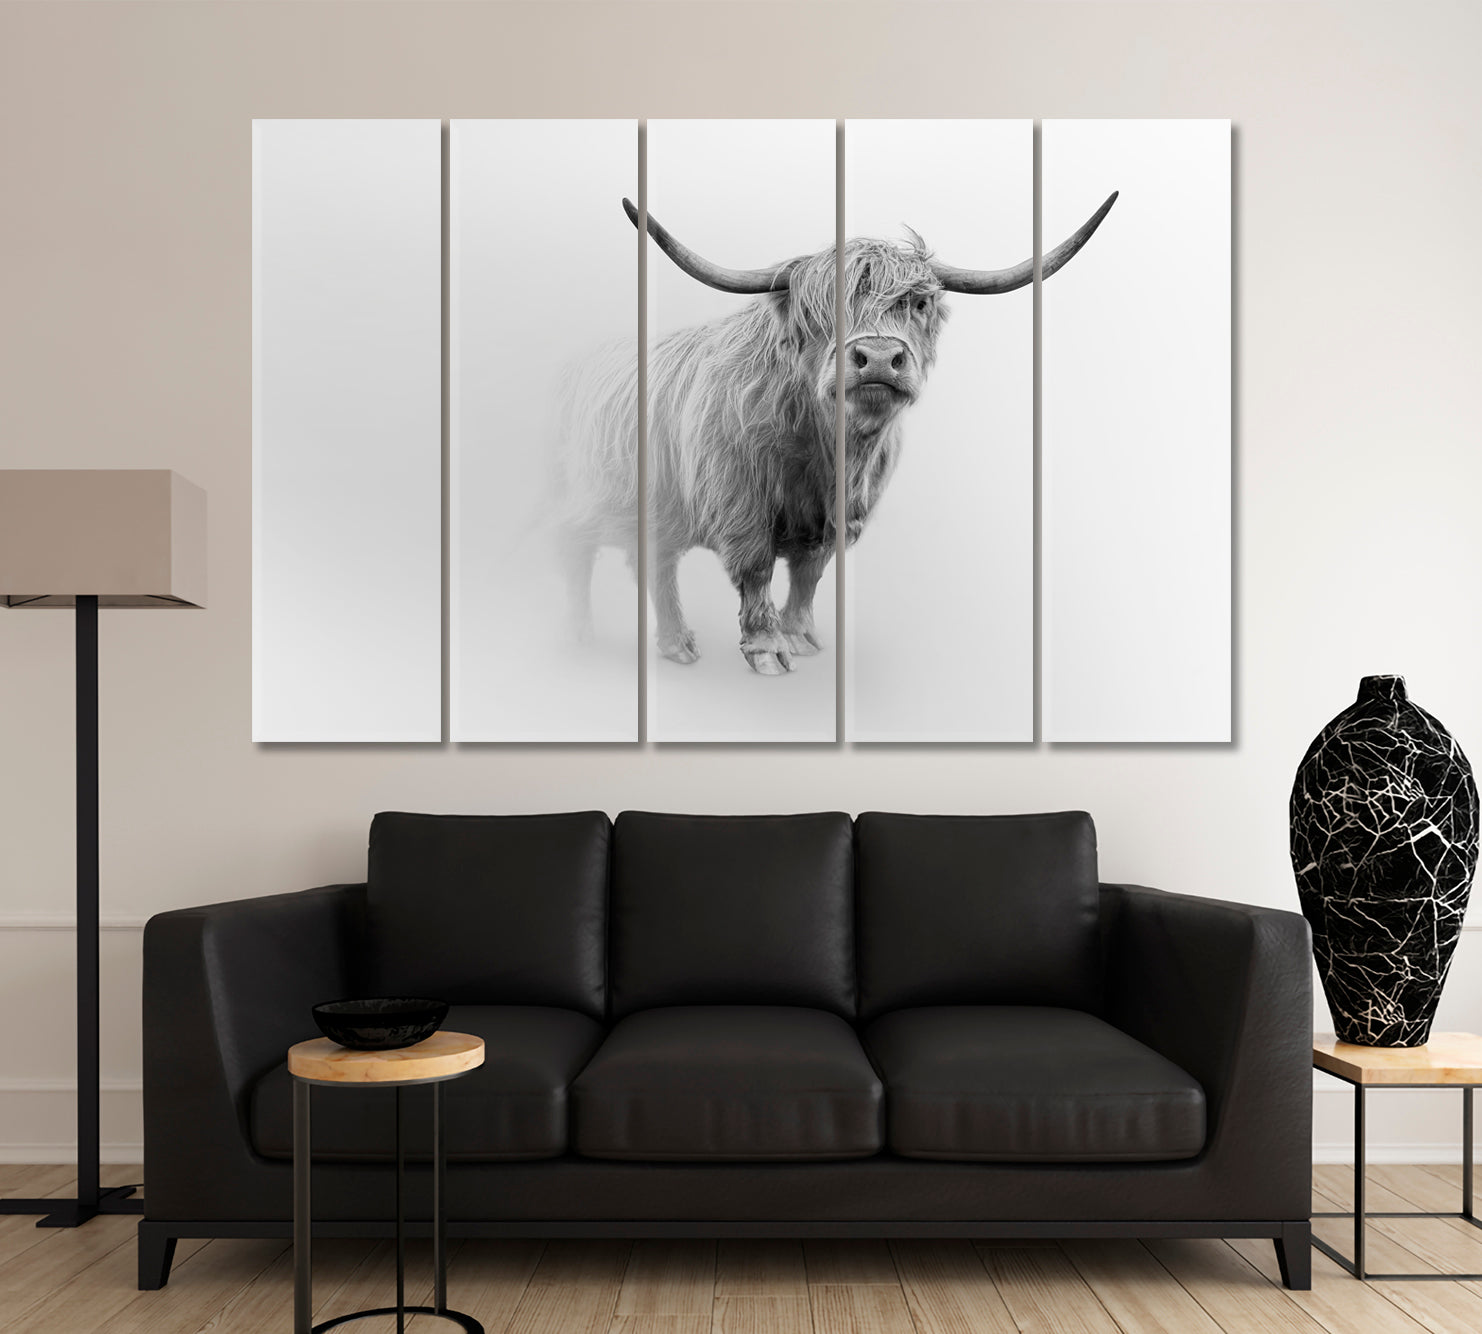 Young Scottish Highland Cattle Cow Animals Canvas Print Artesty 5 panels 36" x 24" 